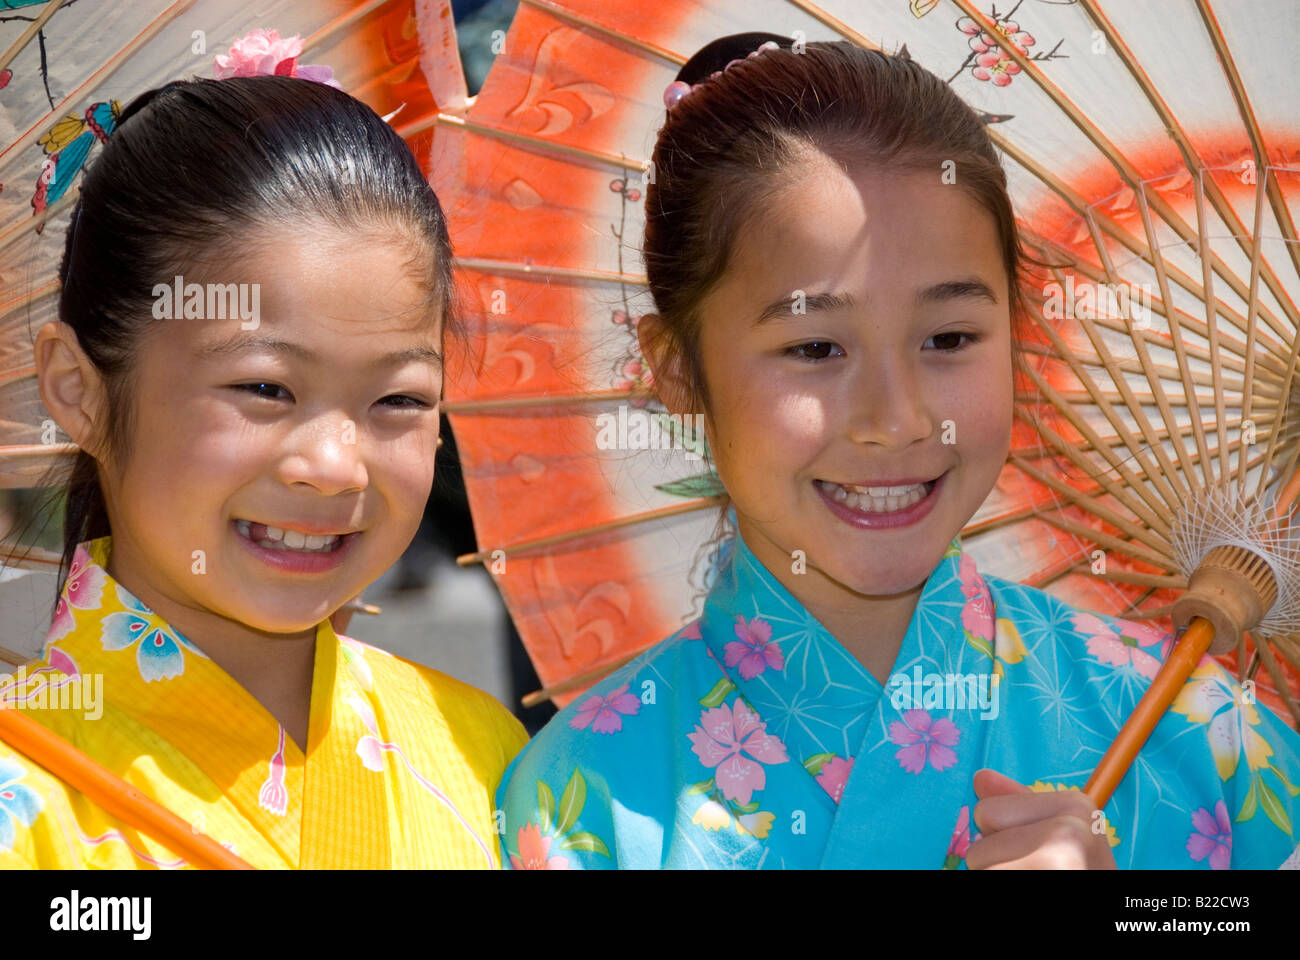 Two Japanese girls in traditional dress with umbrellas at the Cherry Blossom Festival Grand Parade, San Francisco, California Stock Photo